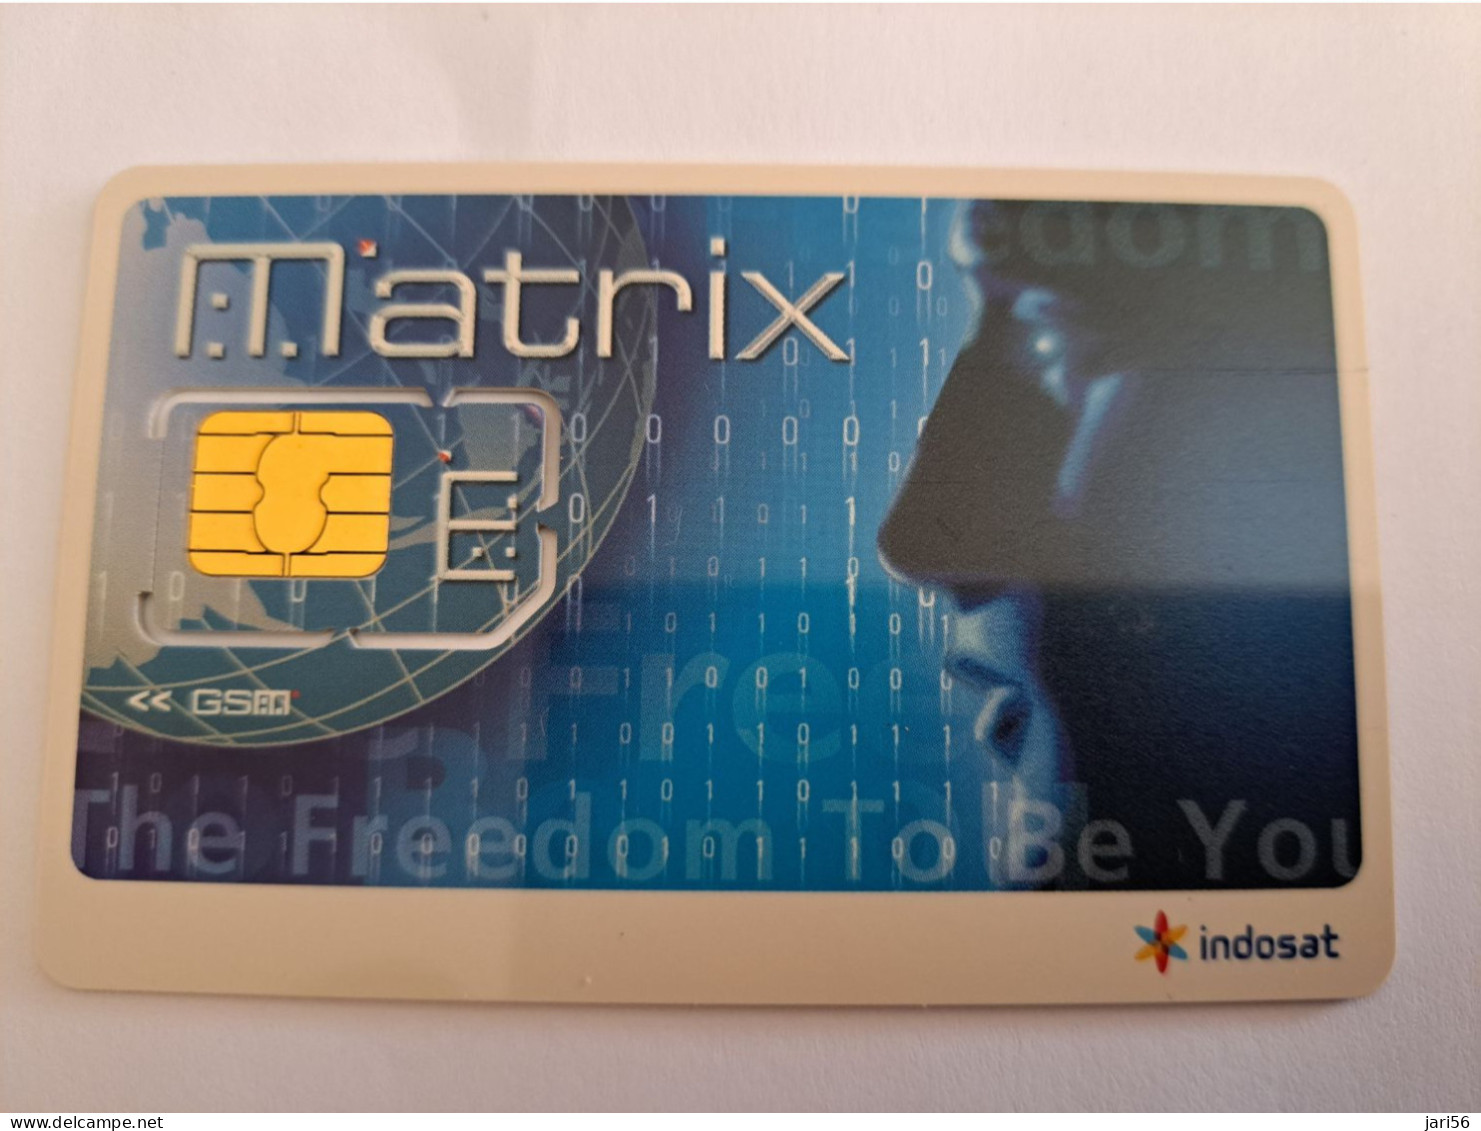 INDONESIA  GSM PREPAID/ CHIP / MATRIX/ THE FREEDOM TO BE YOU    INDOSAT  MINT CARD    **13462 ** - Indonésie